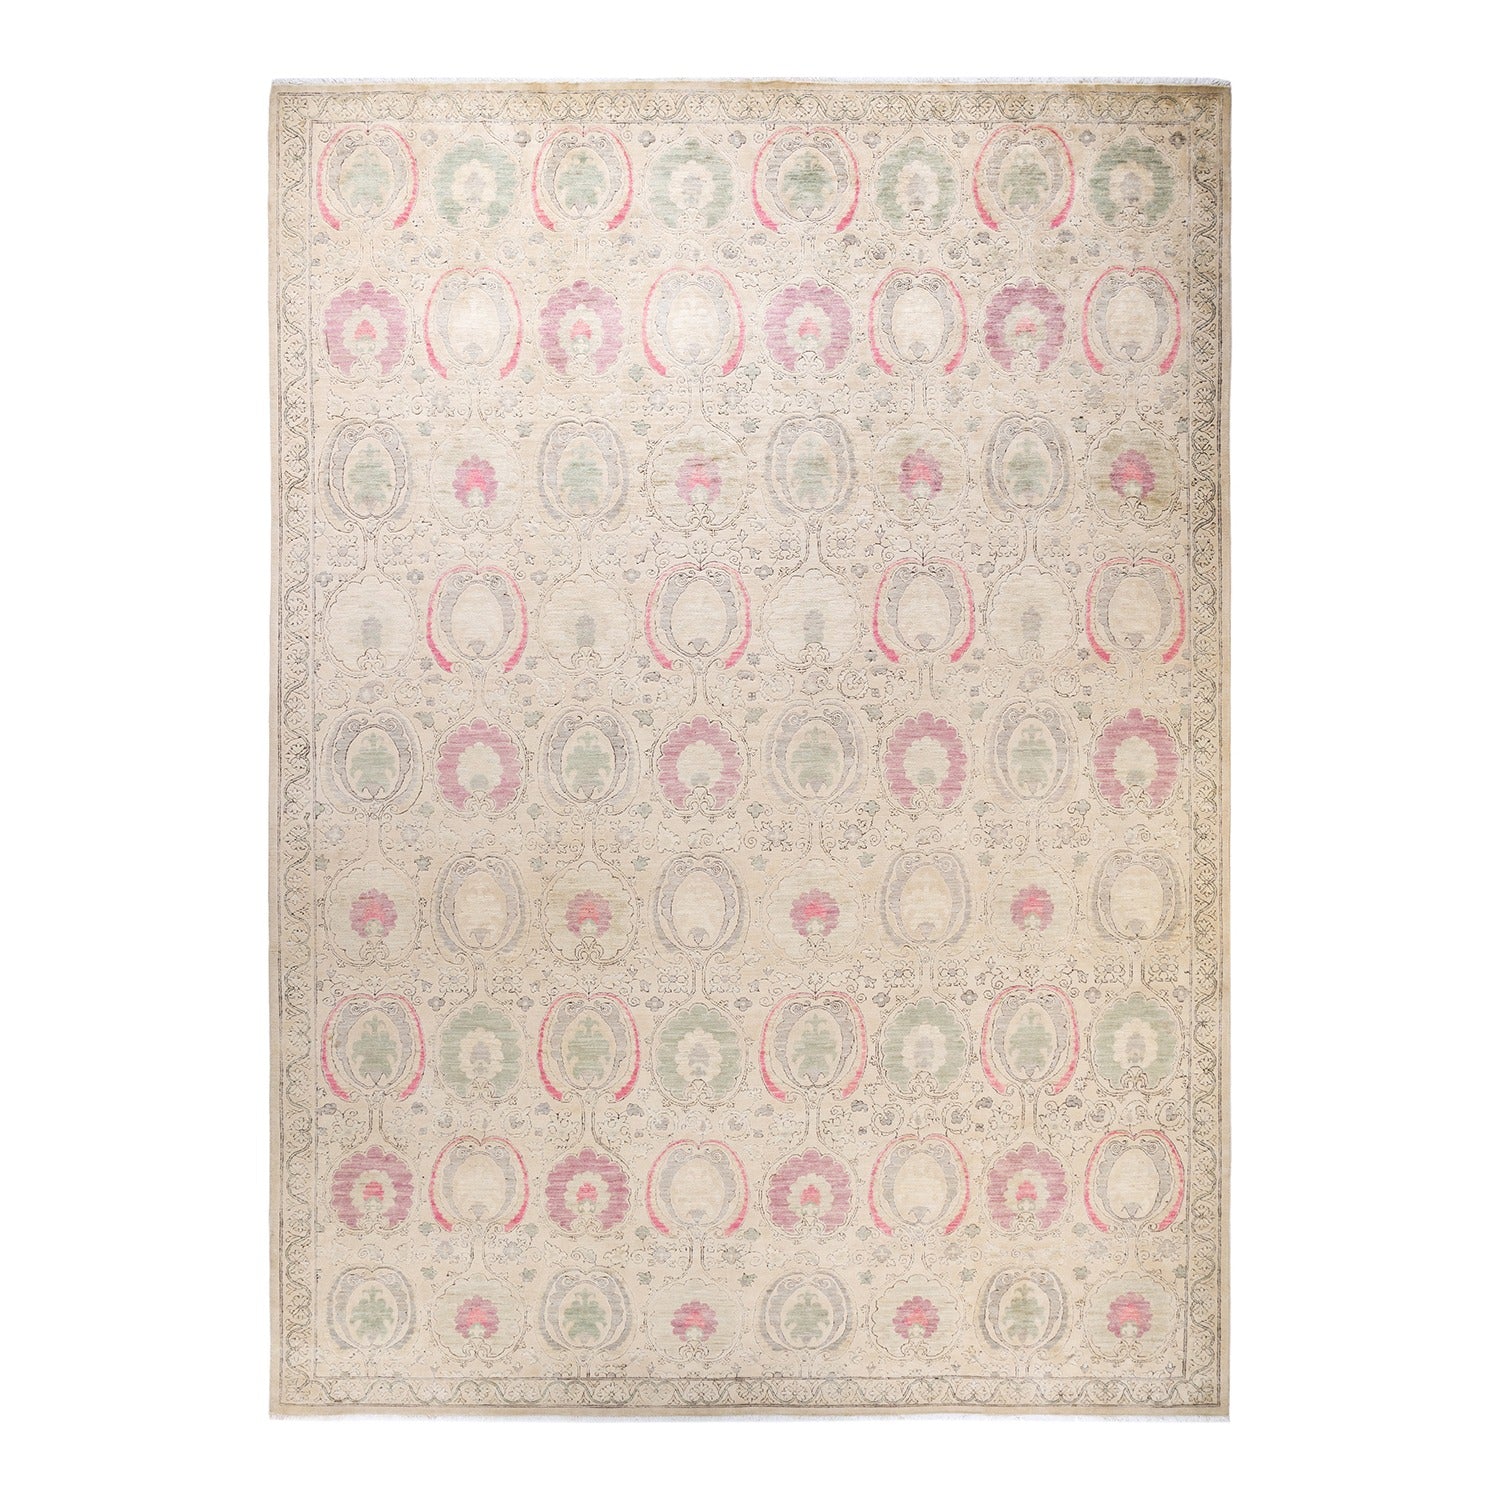 Vintage rectangular rug with ornate floral medallion pattern in pink and green.